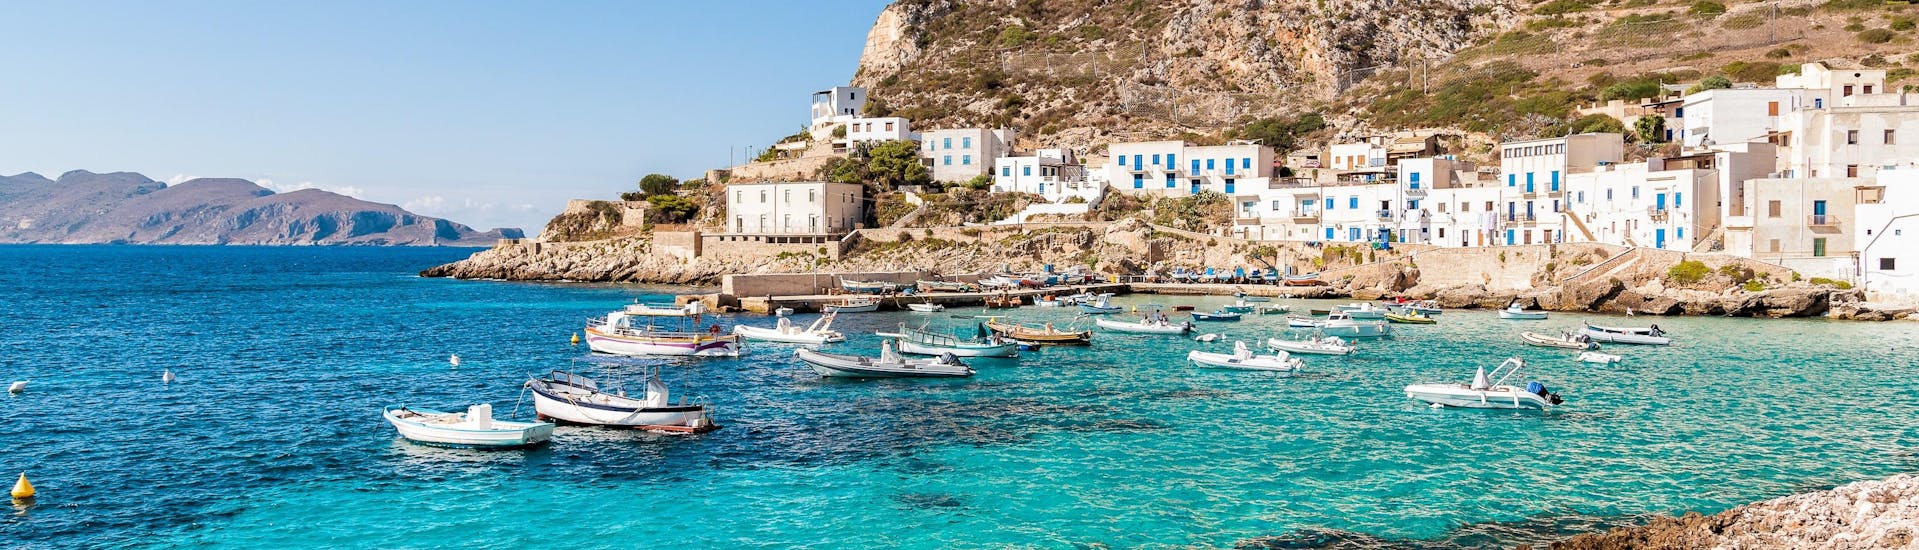 A view of the coastline of the island of Levanzo that visitors can see on a boat trip to the Egadi Islands in Sicily.